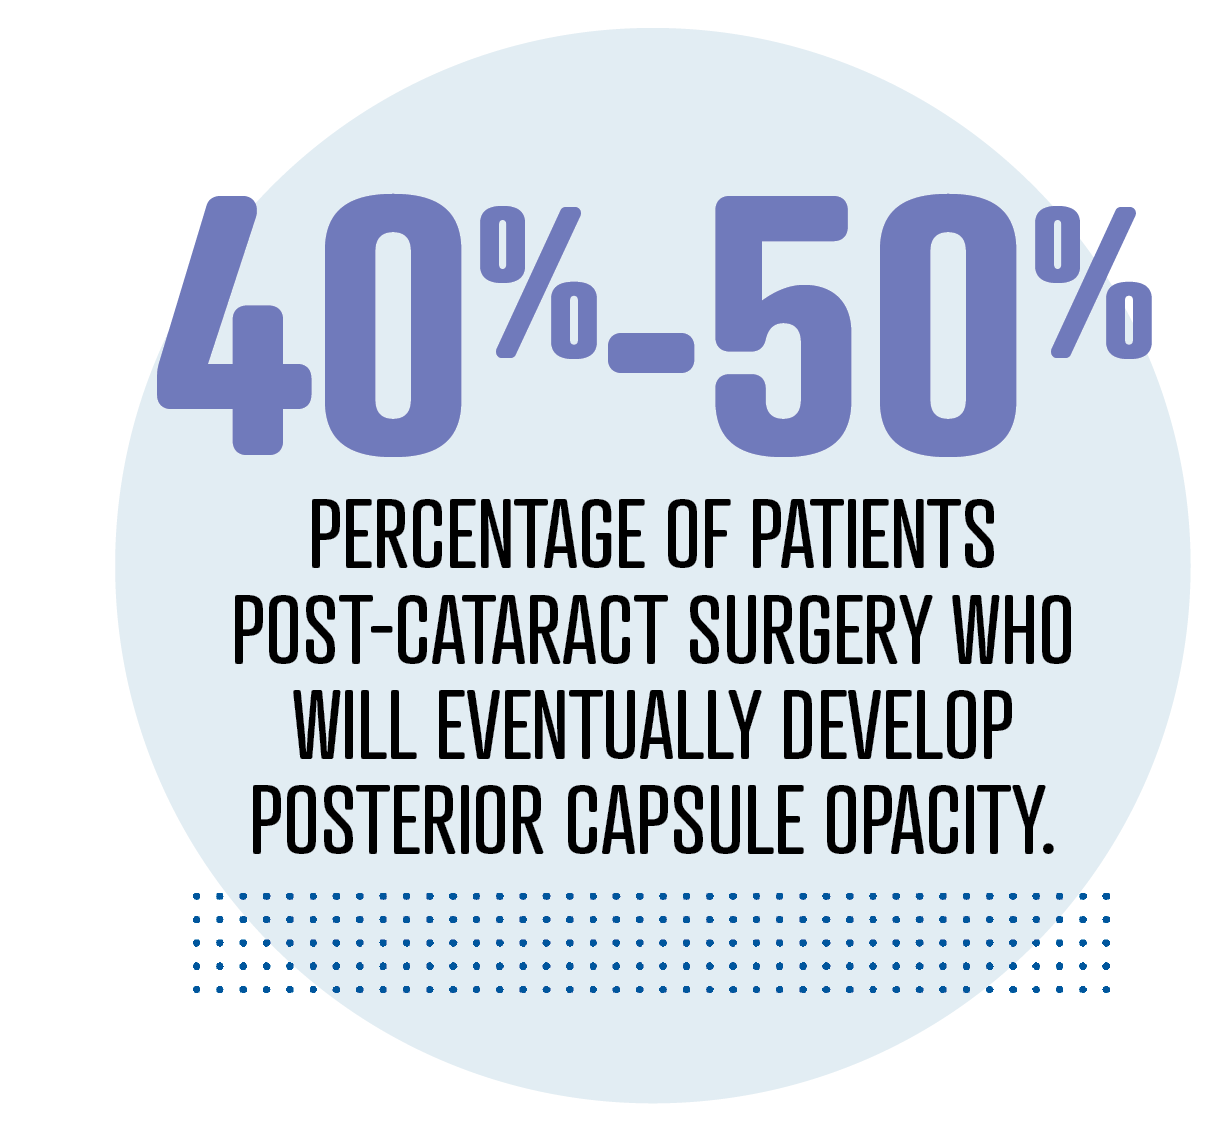 40%-50% percentage of patients post-cataract surgery who will eventually develop posterior capsule opacity